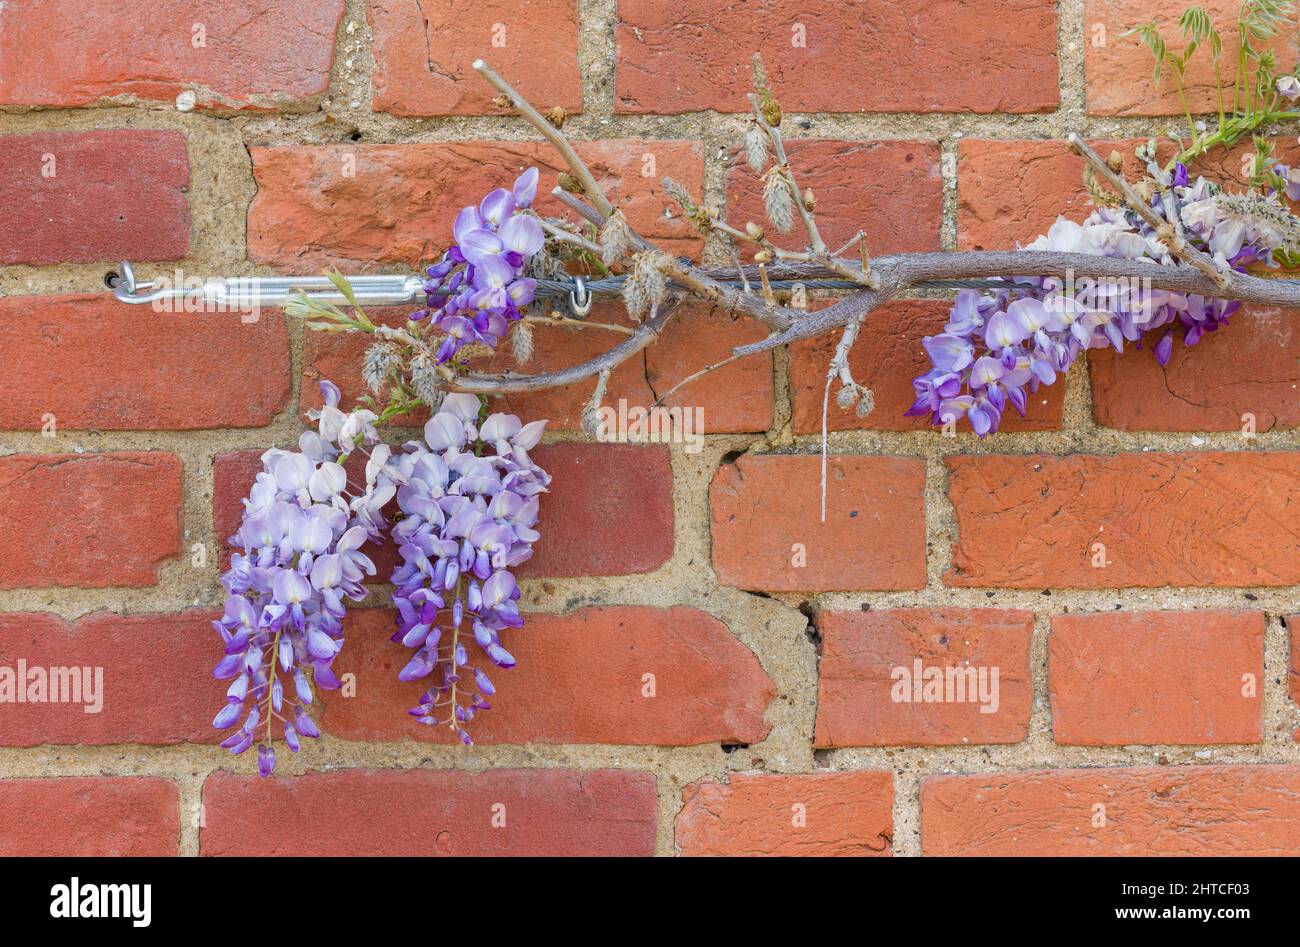 Training a climbing wisteria plant or tree on a brick wall with wire rope and vine eyes, UK Stock Photo